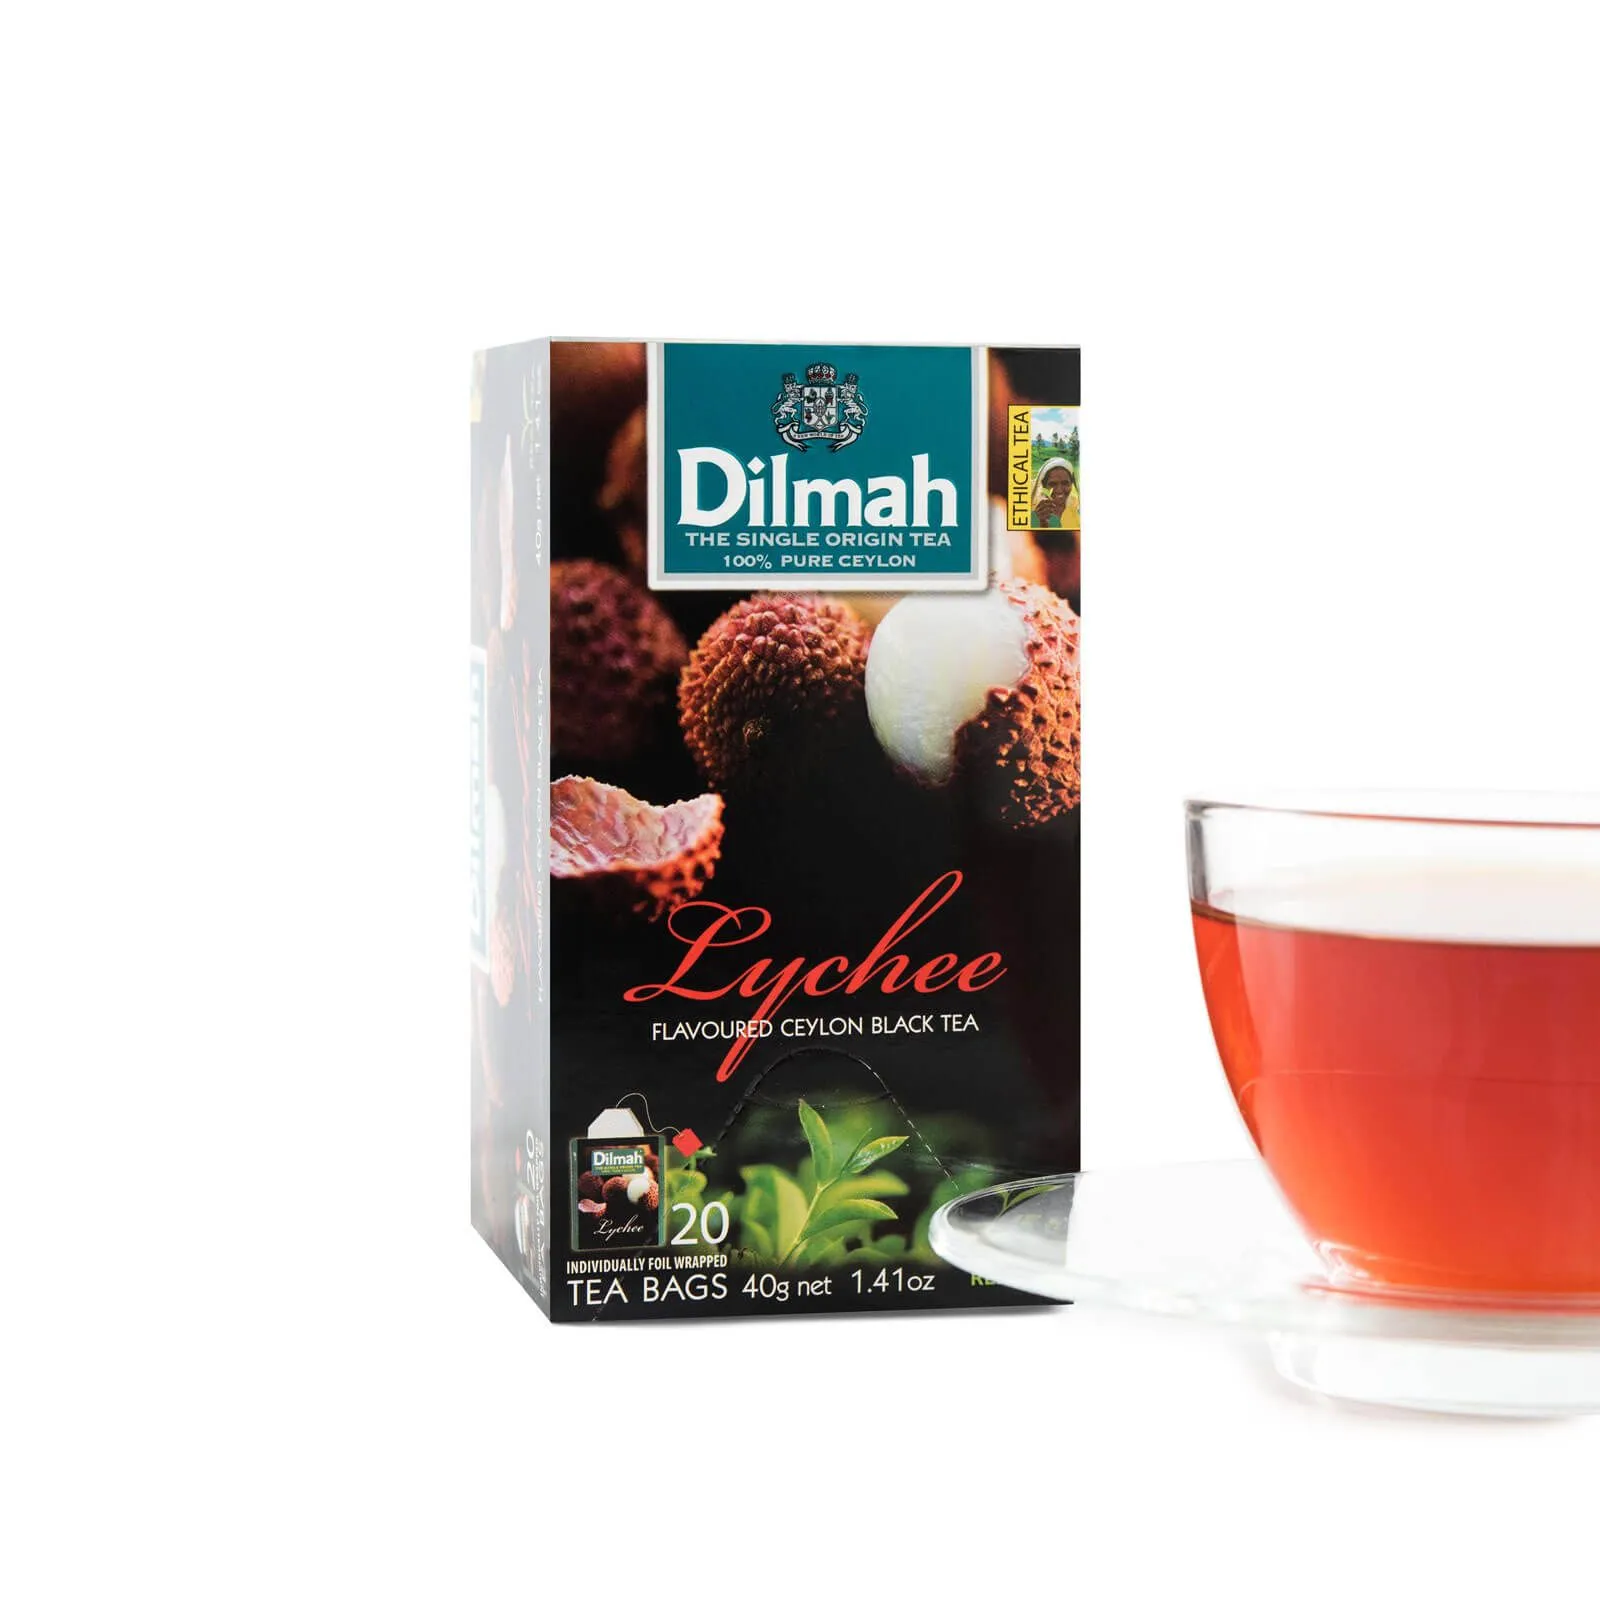 Pack of 20 individually wrapped tea bags of Lychee black tea